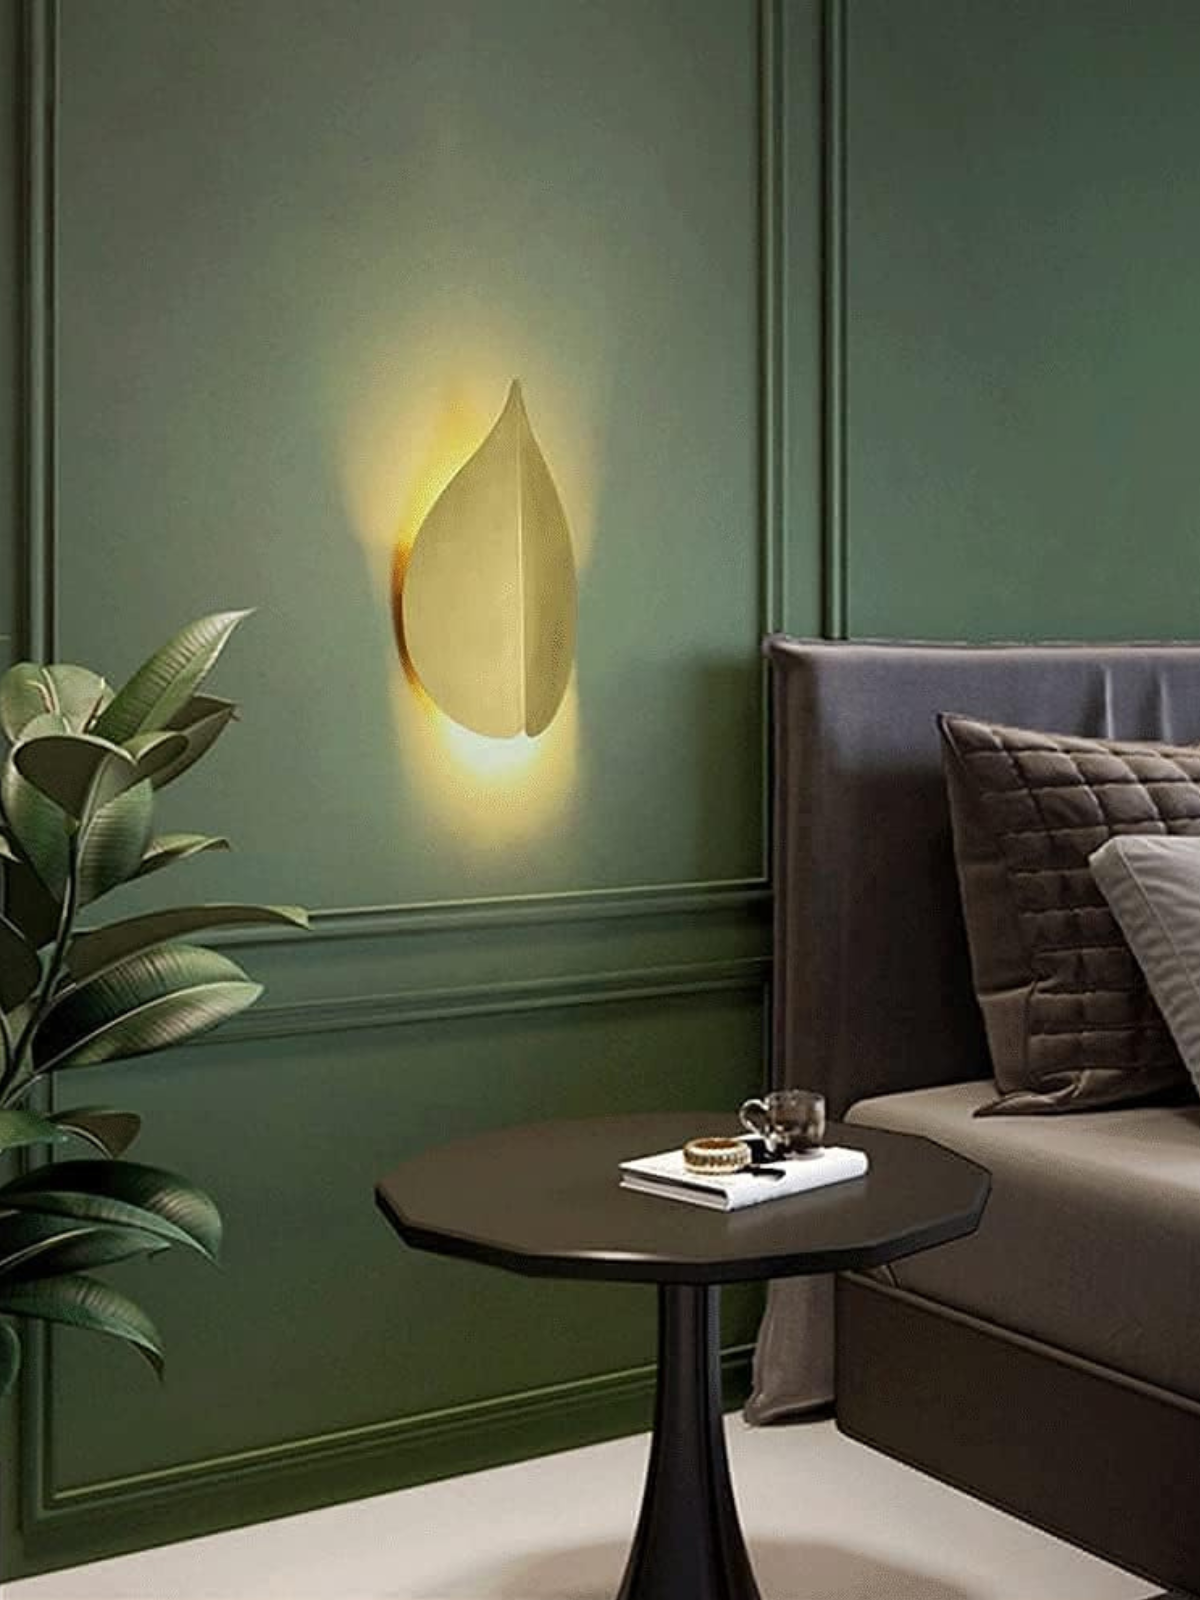 LED Wall Lamp Personality Leaf Design Wall Sconce Postmodern Dimmable Copper Wall Lights Golden Wall Lighting for Bedroom Living Room Corridor